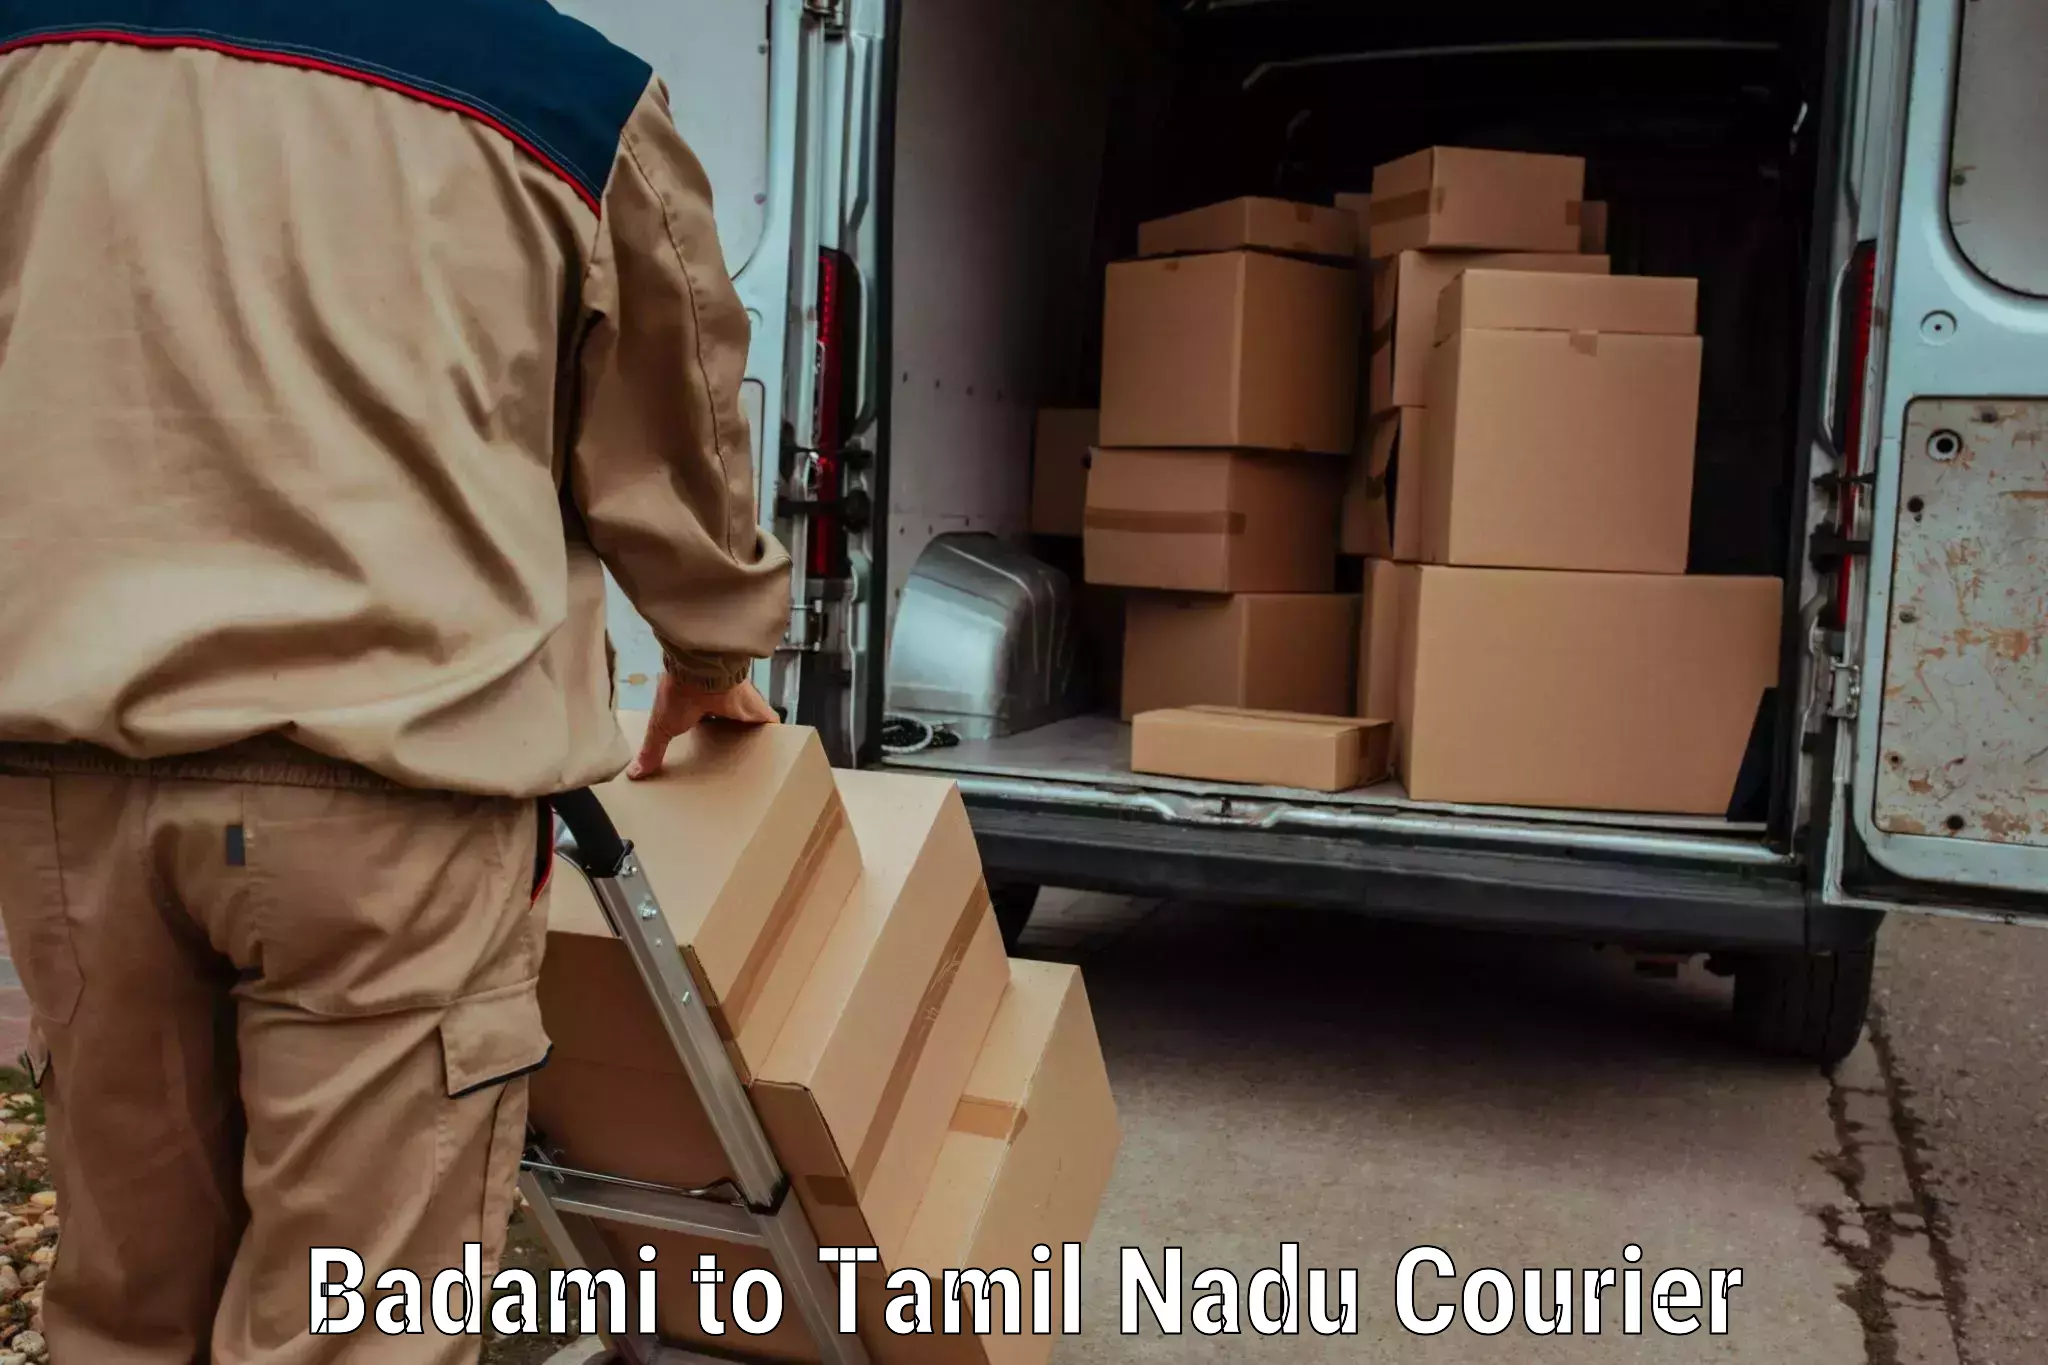 Courier service partnerships Badami to Ooty